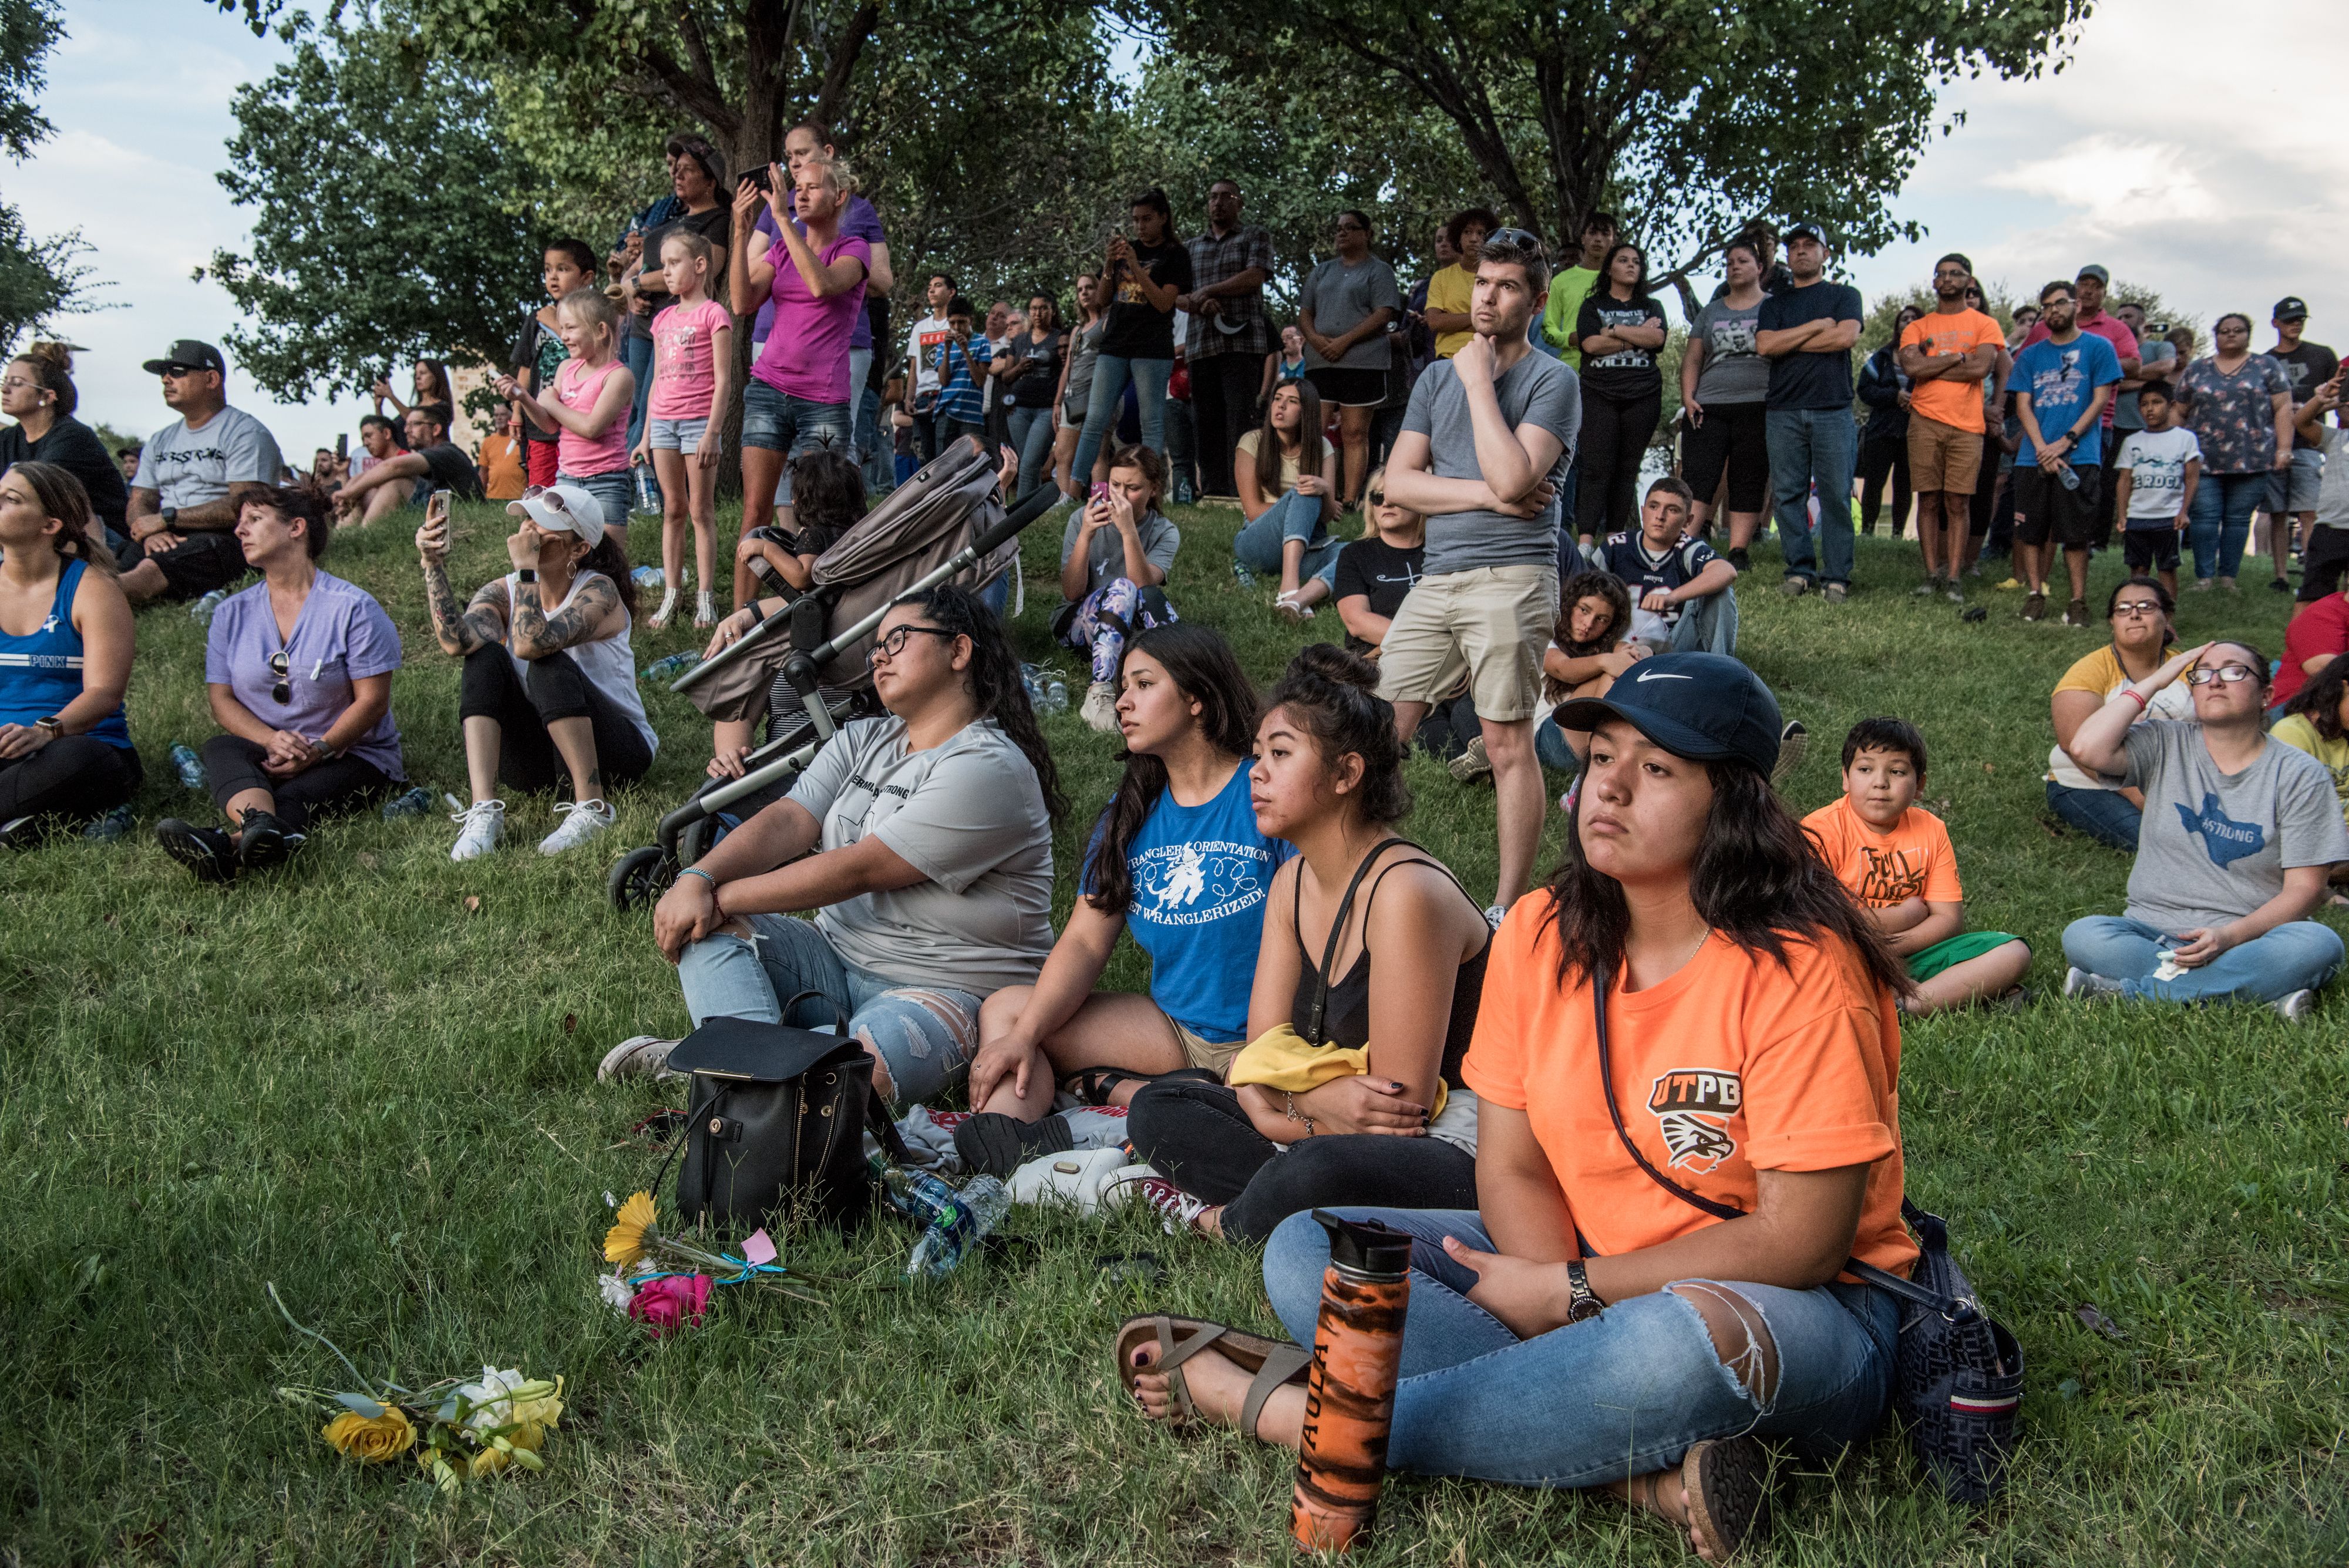 People attend a prayer vigil at the University of Texas of the Permian Basin (UTPB) for the victims of a mass shooting, September 1, 2019 in Odessa, Texas. 